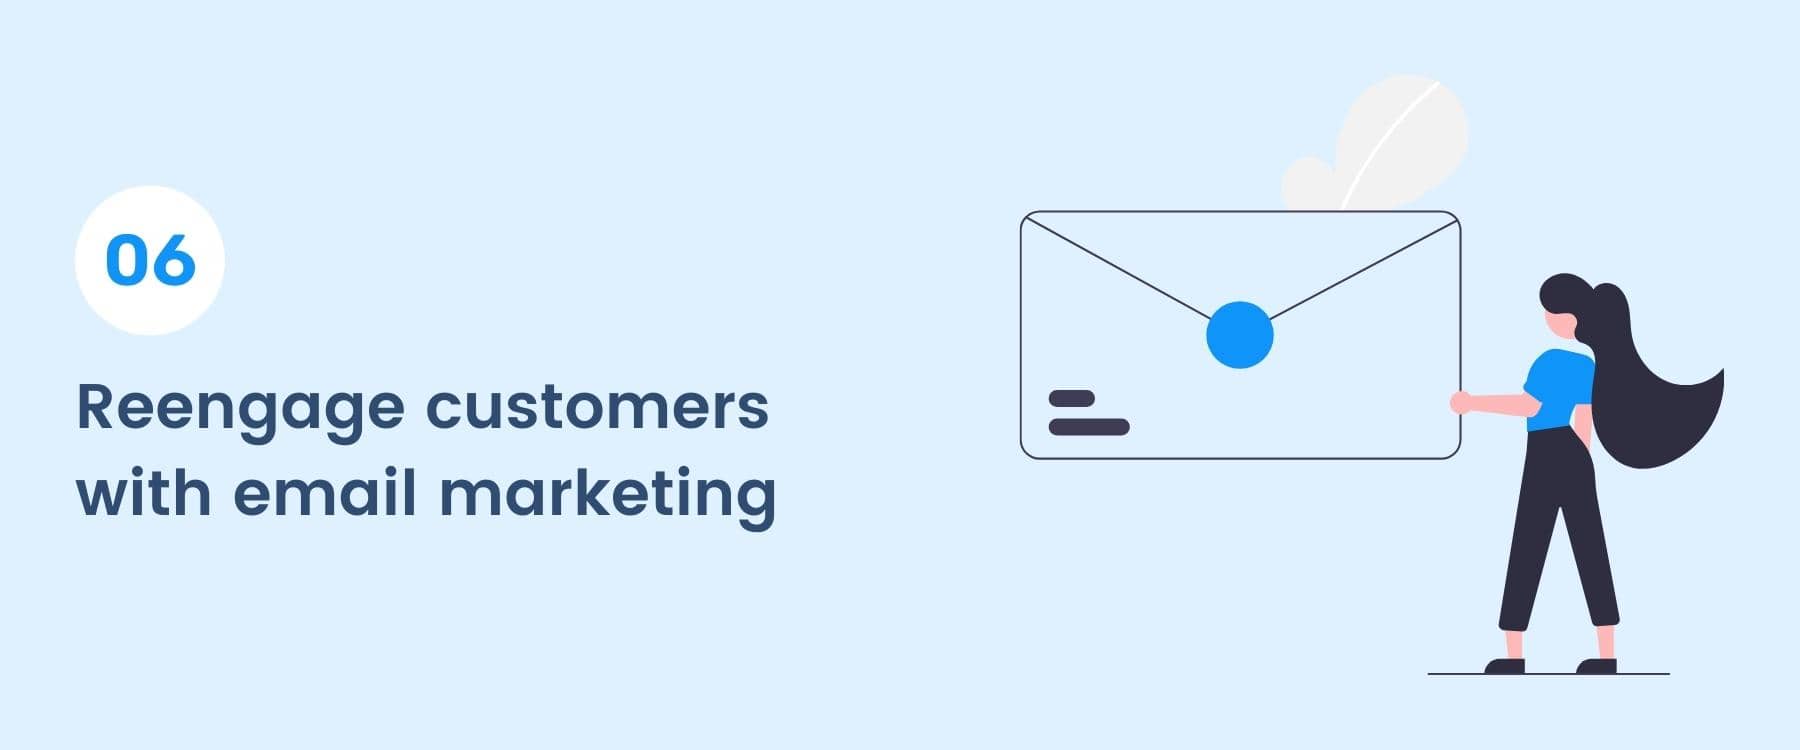 Reengage customers with email marketing